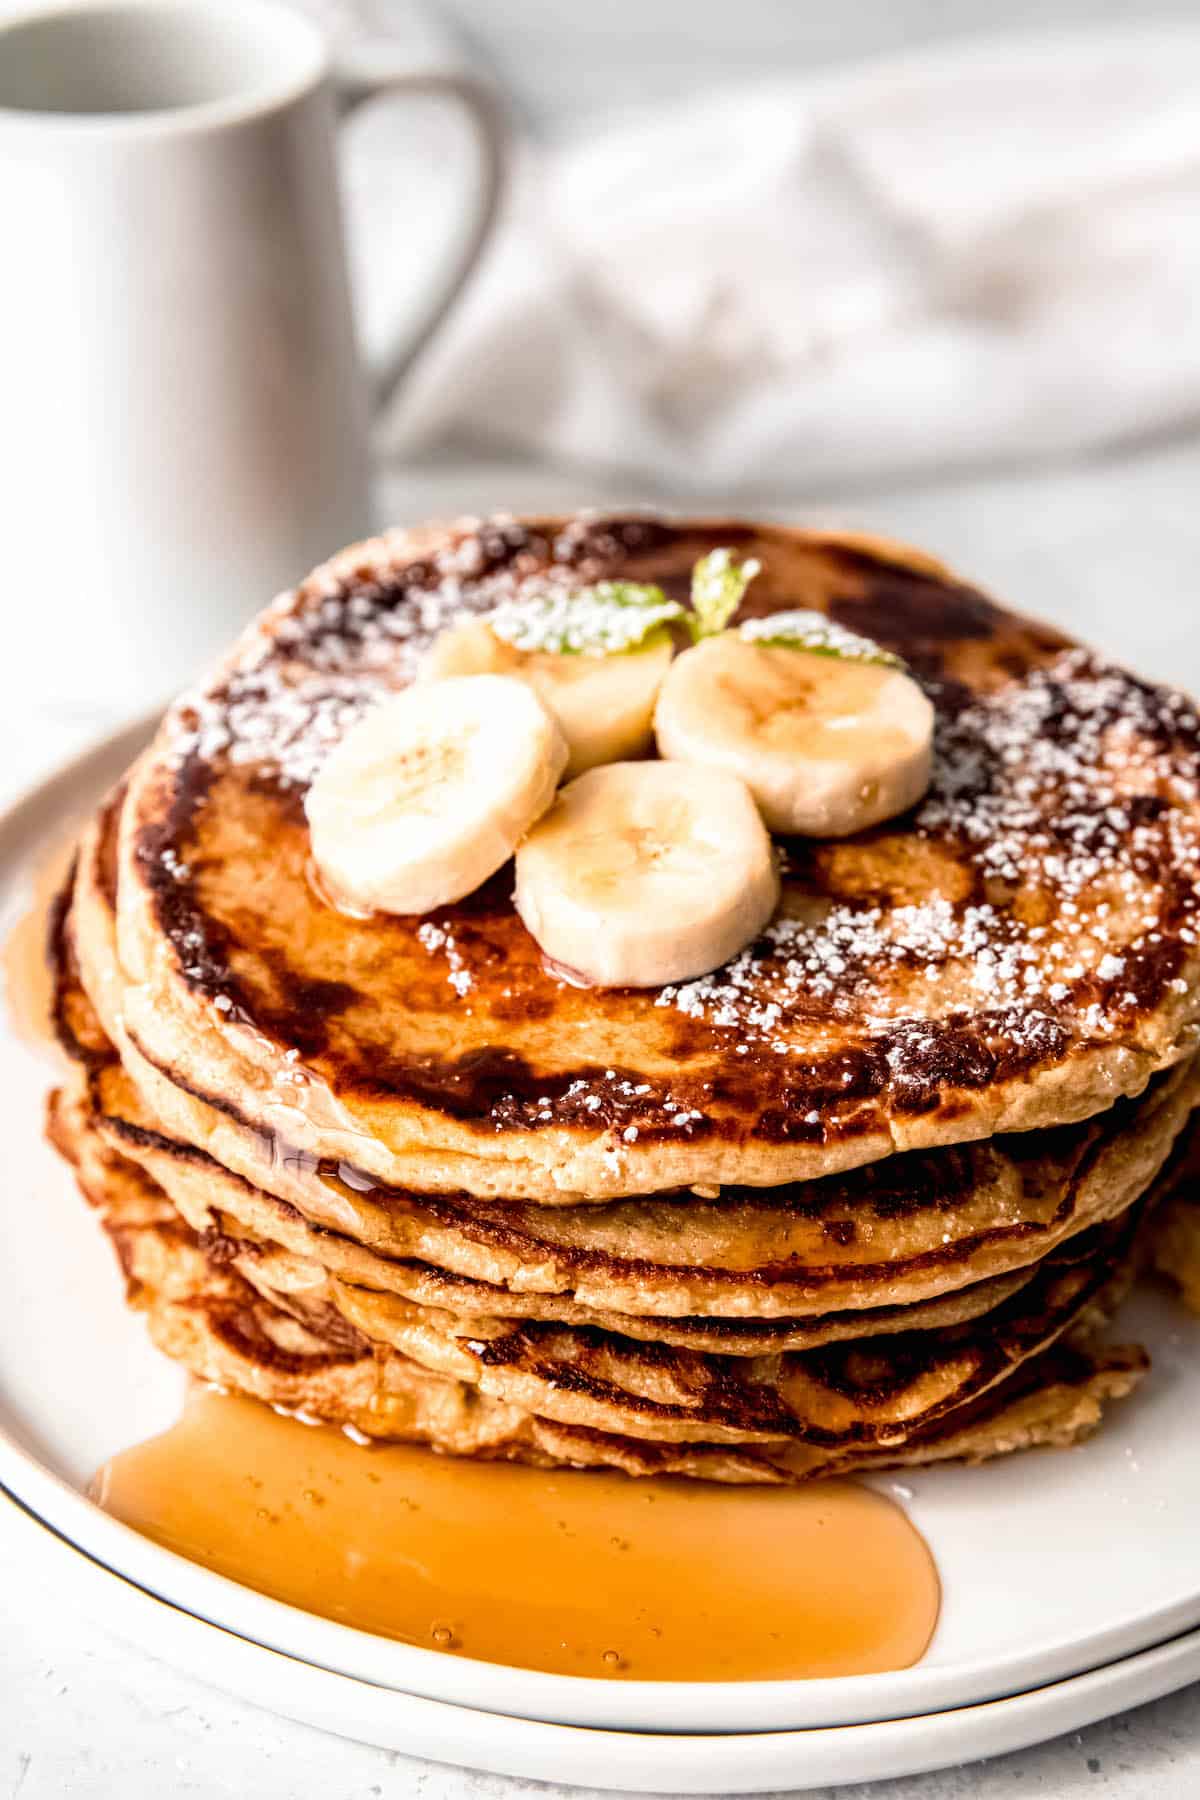 stack of banana protein pancakes made with cottage cheese and oats topped with bananas, maple syrup, and powdered sugar.